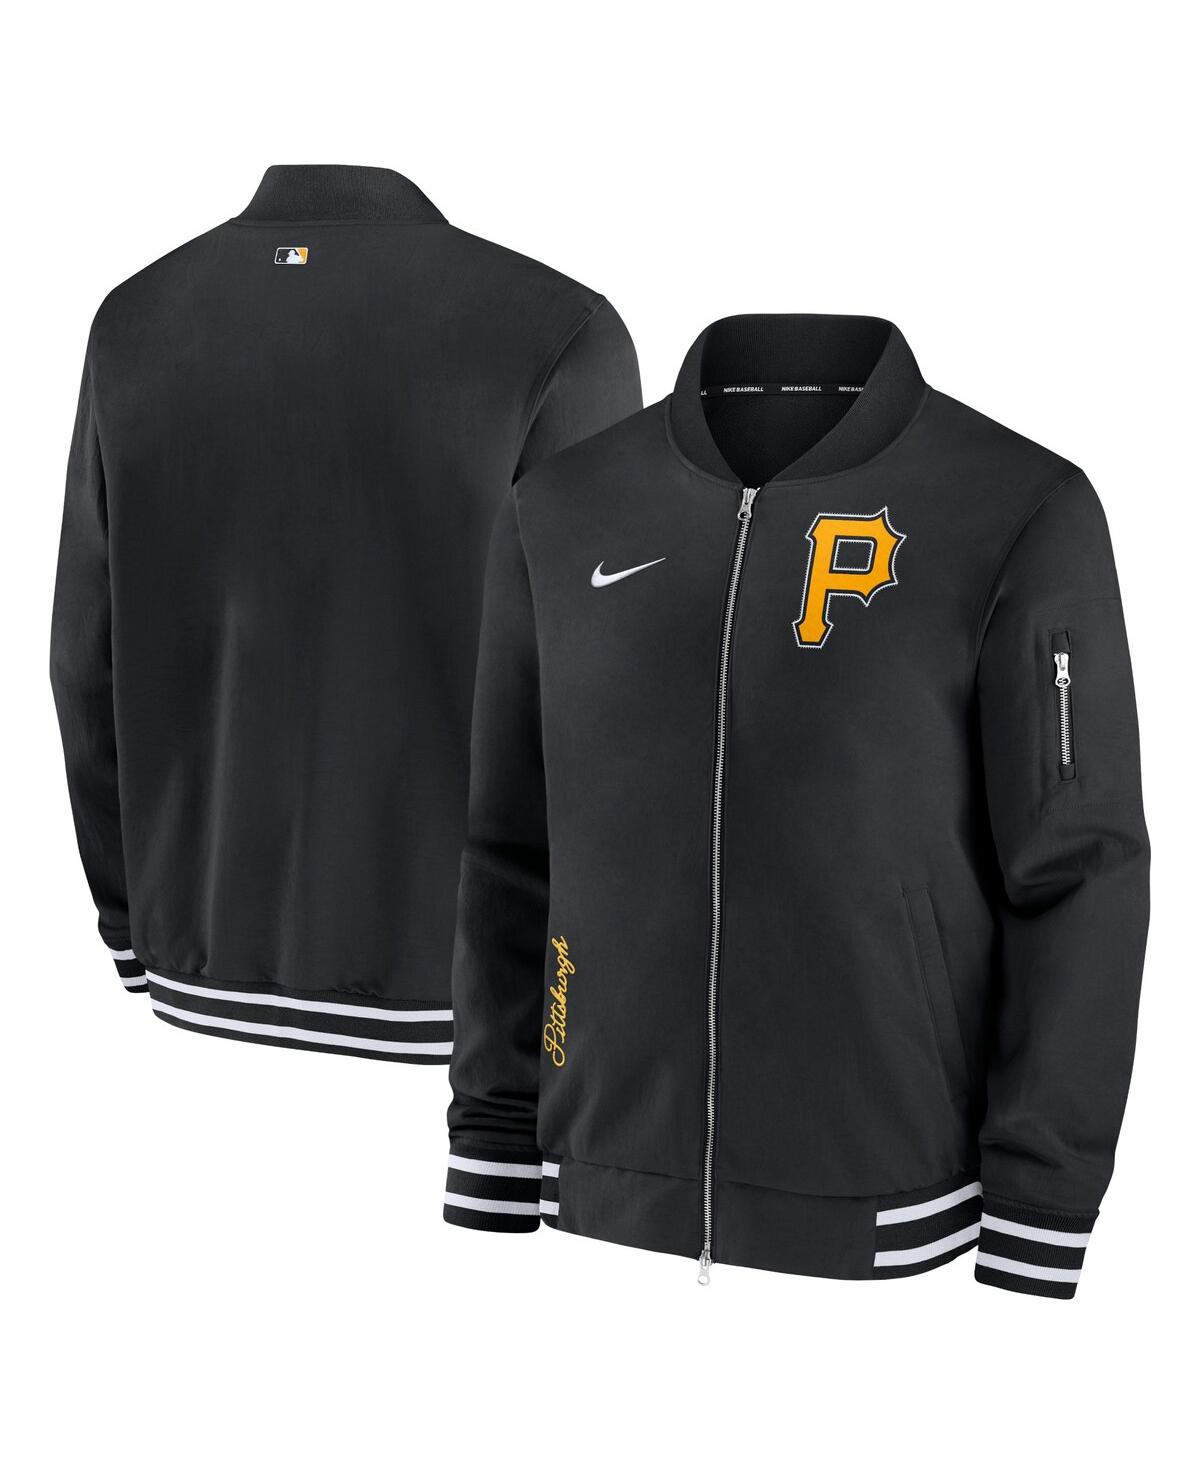 Men's Nike Black Pittsburgh Pirates Authentic Collection Full-Zip Bomber Jacket - Black